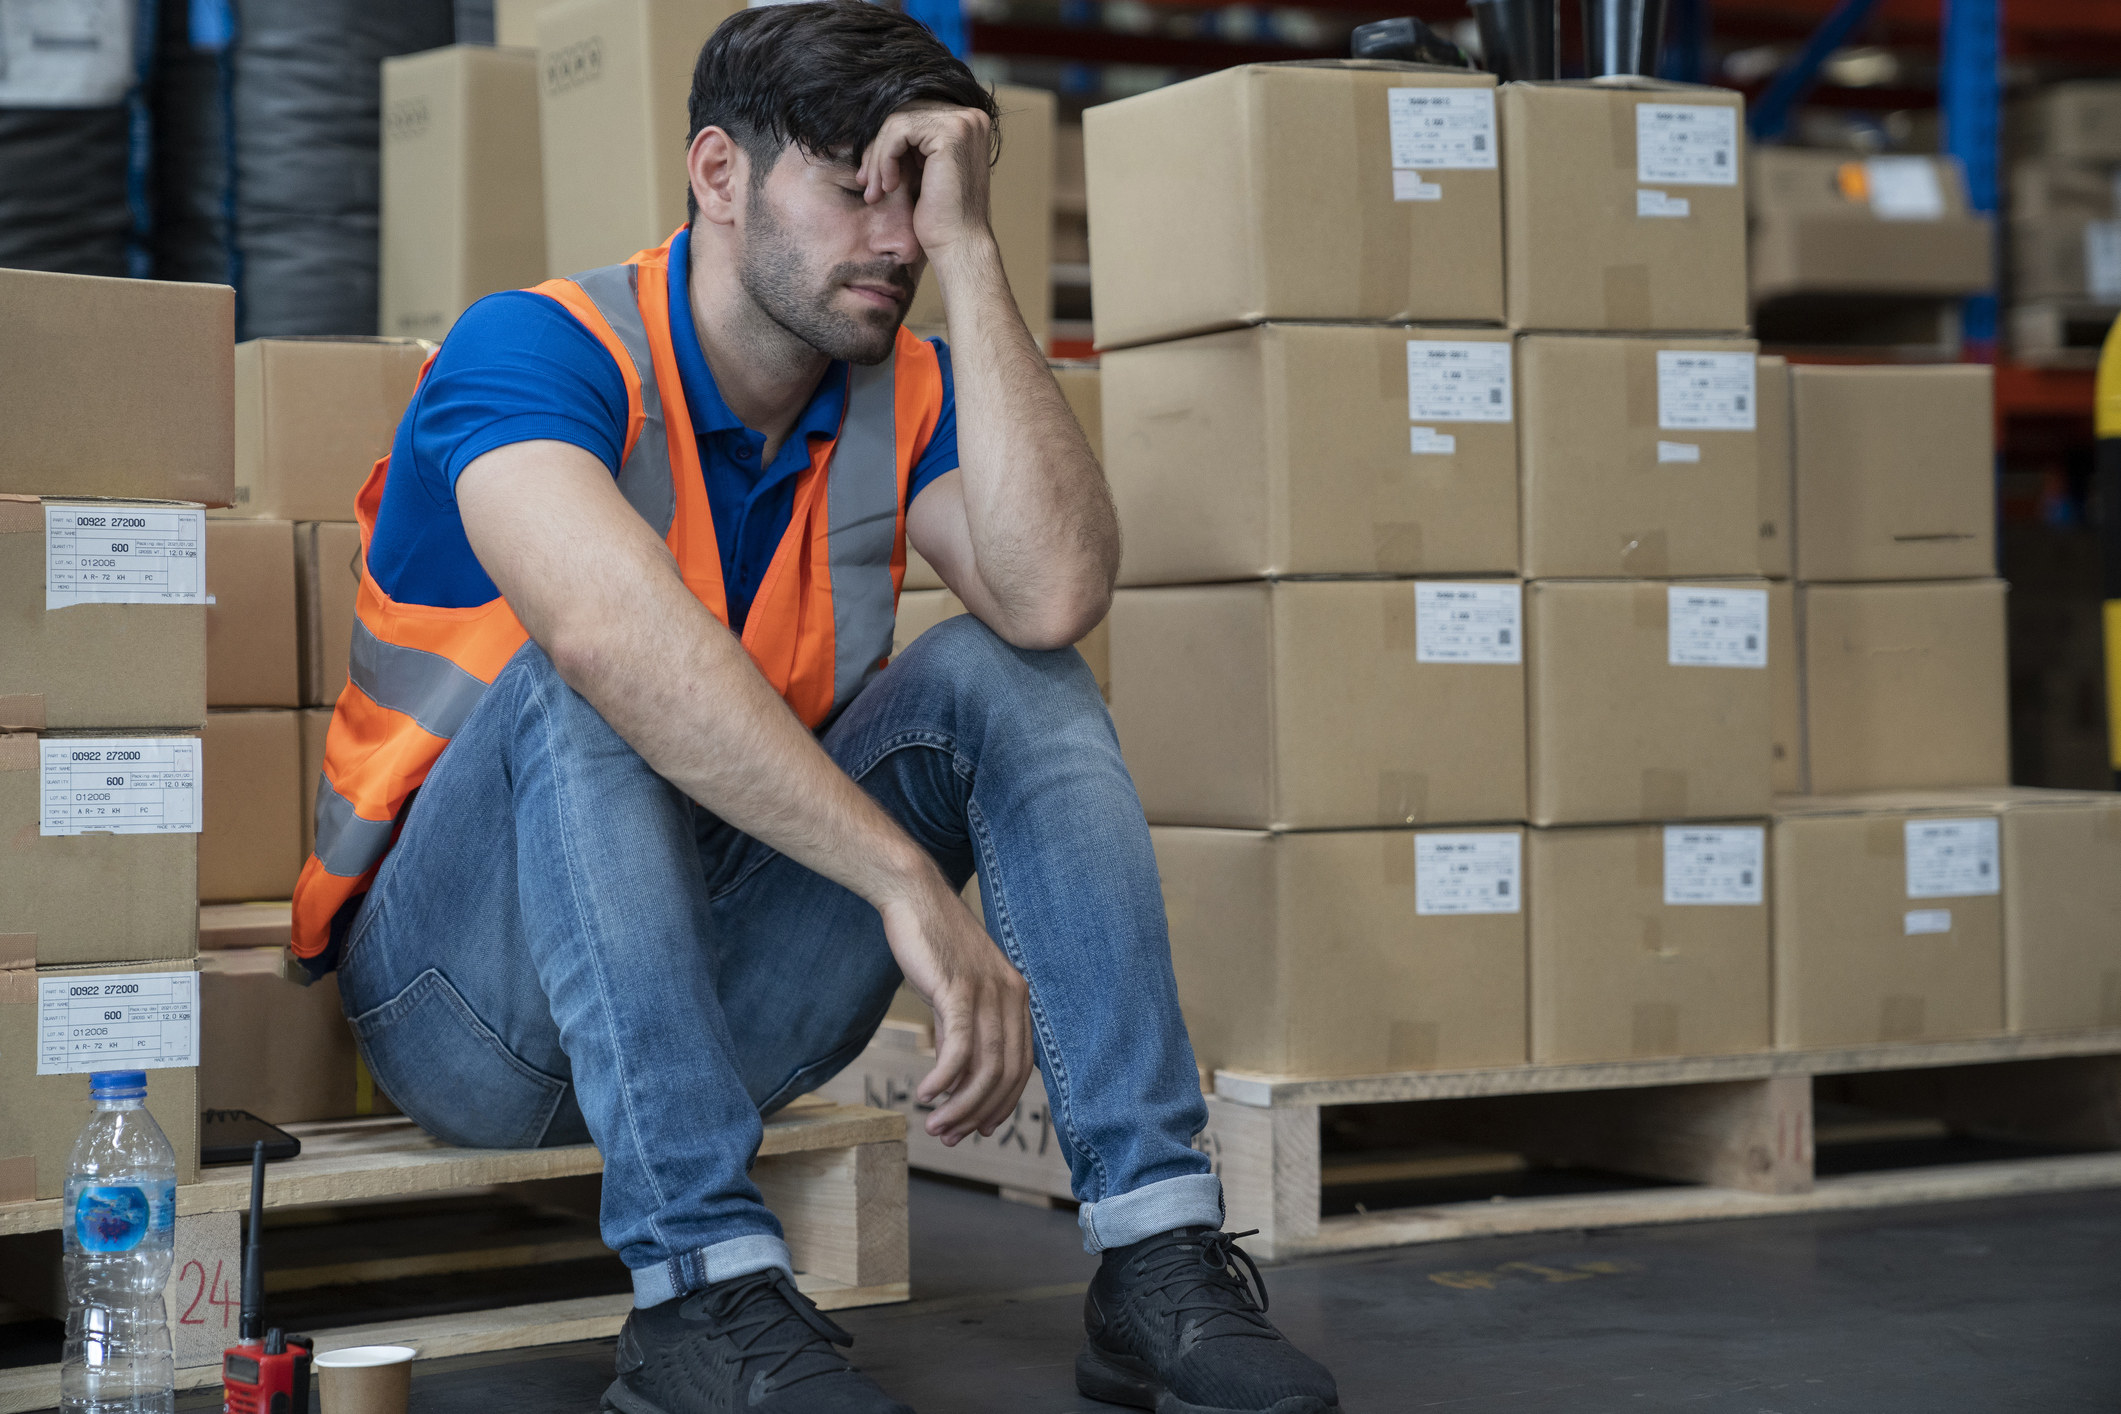 A man looks tired at work in front of piles of boxes